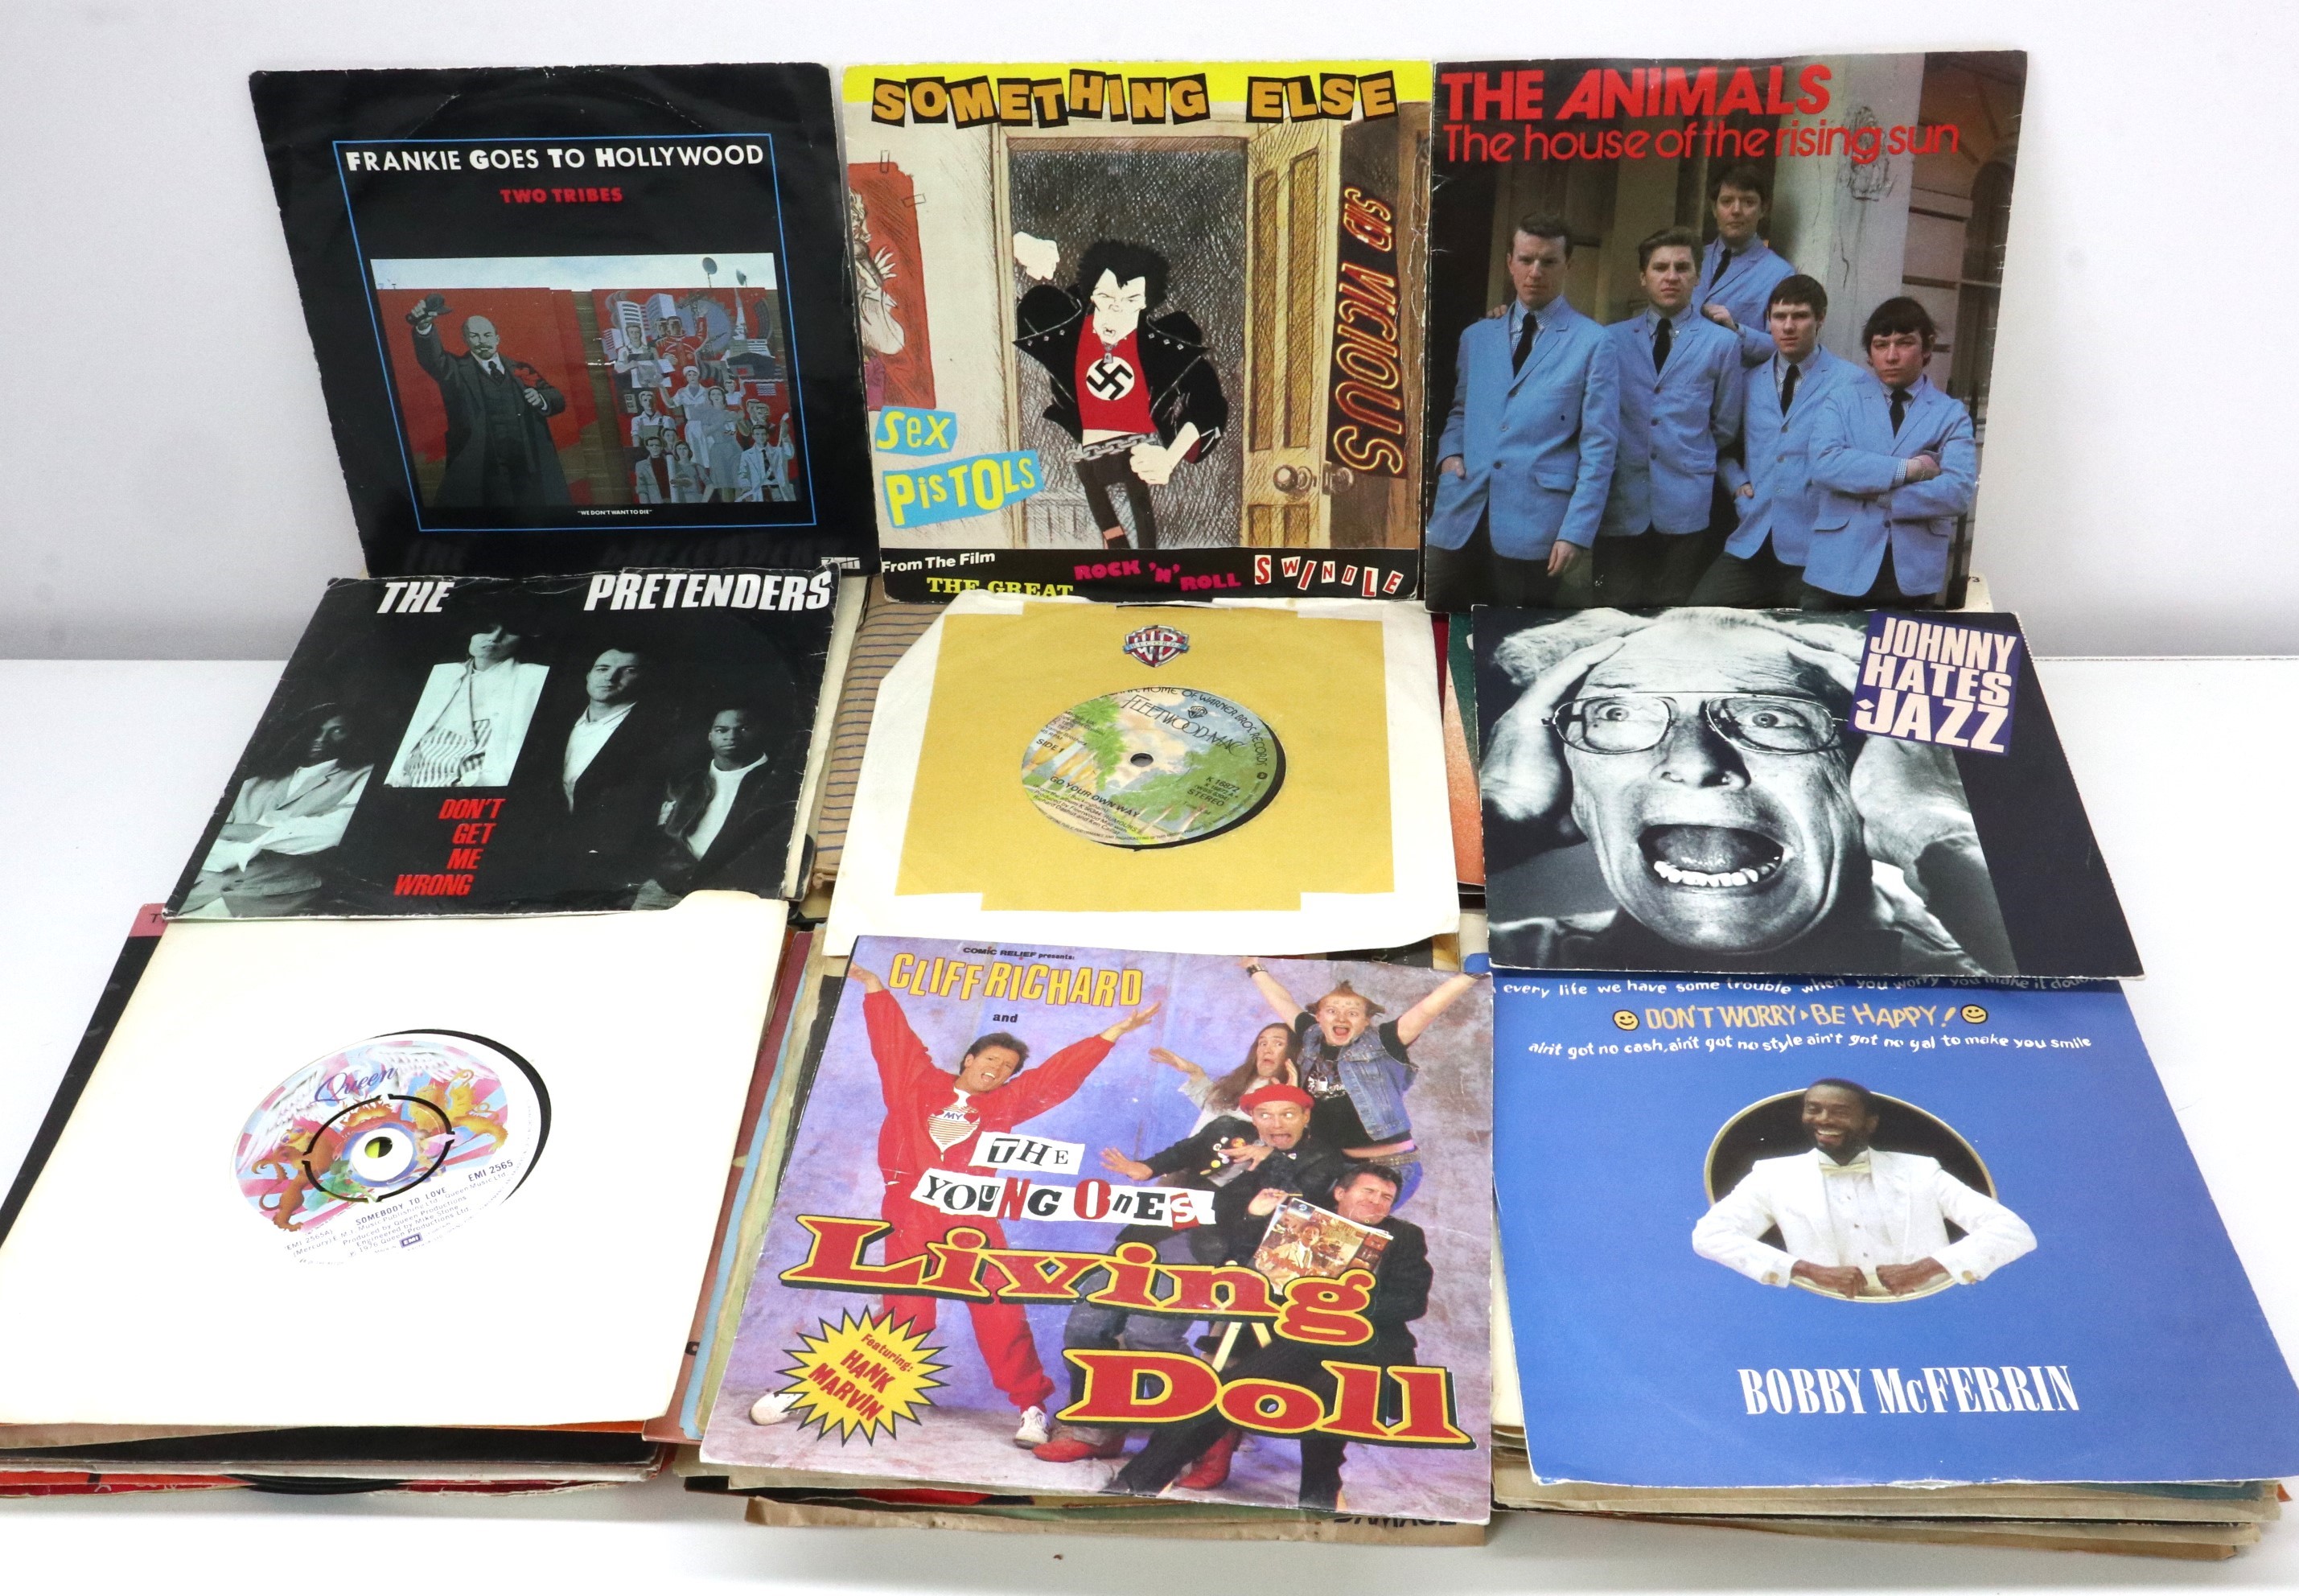 Approximately ninety singles from the 60’s 70’s & 80’s, including Frankie Goes to Hollywood & Sex - Image 2 of 2